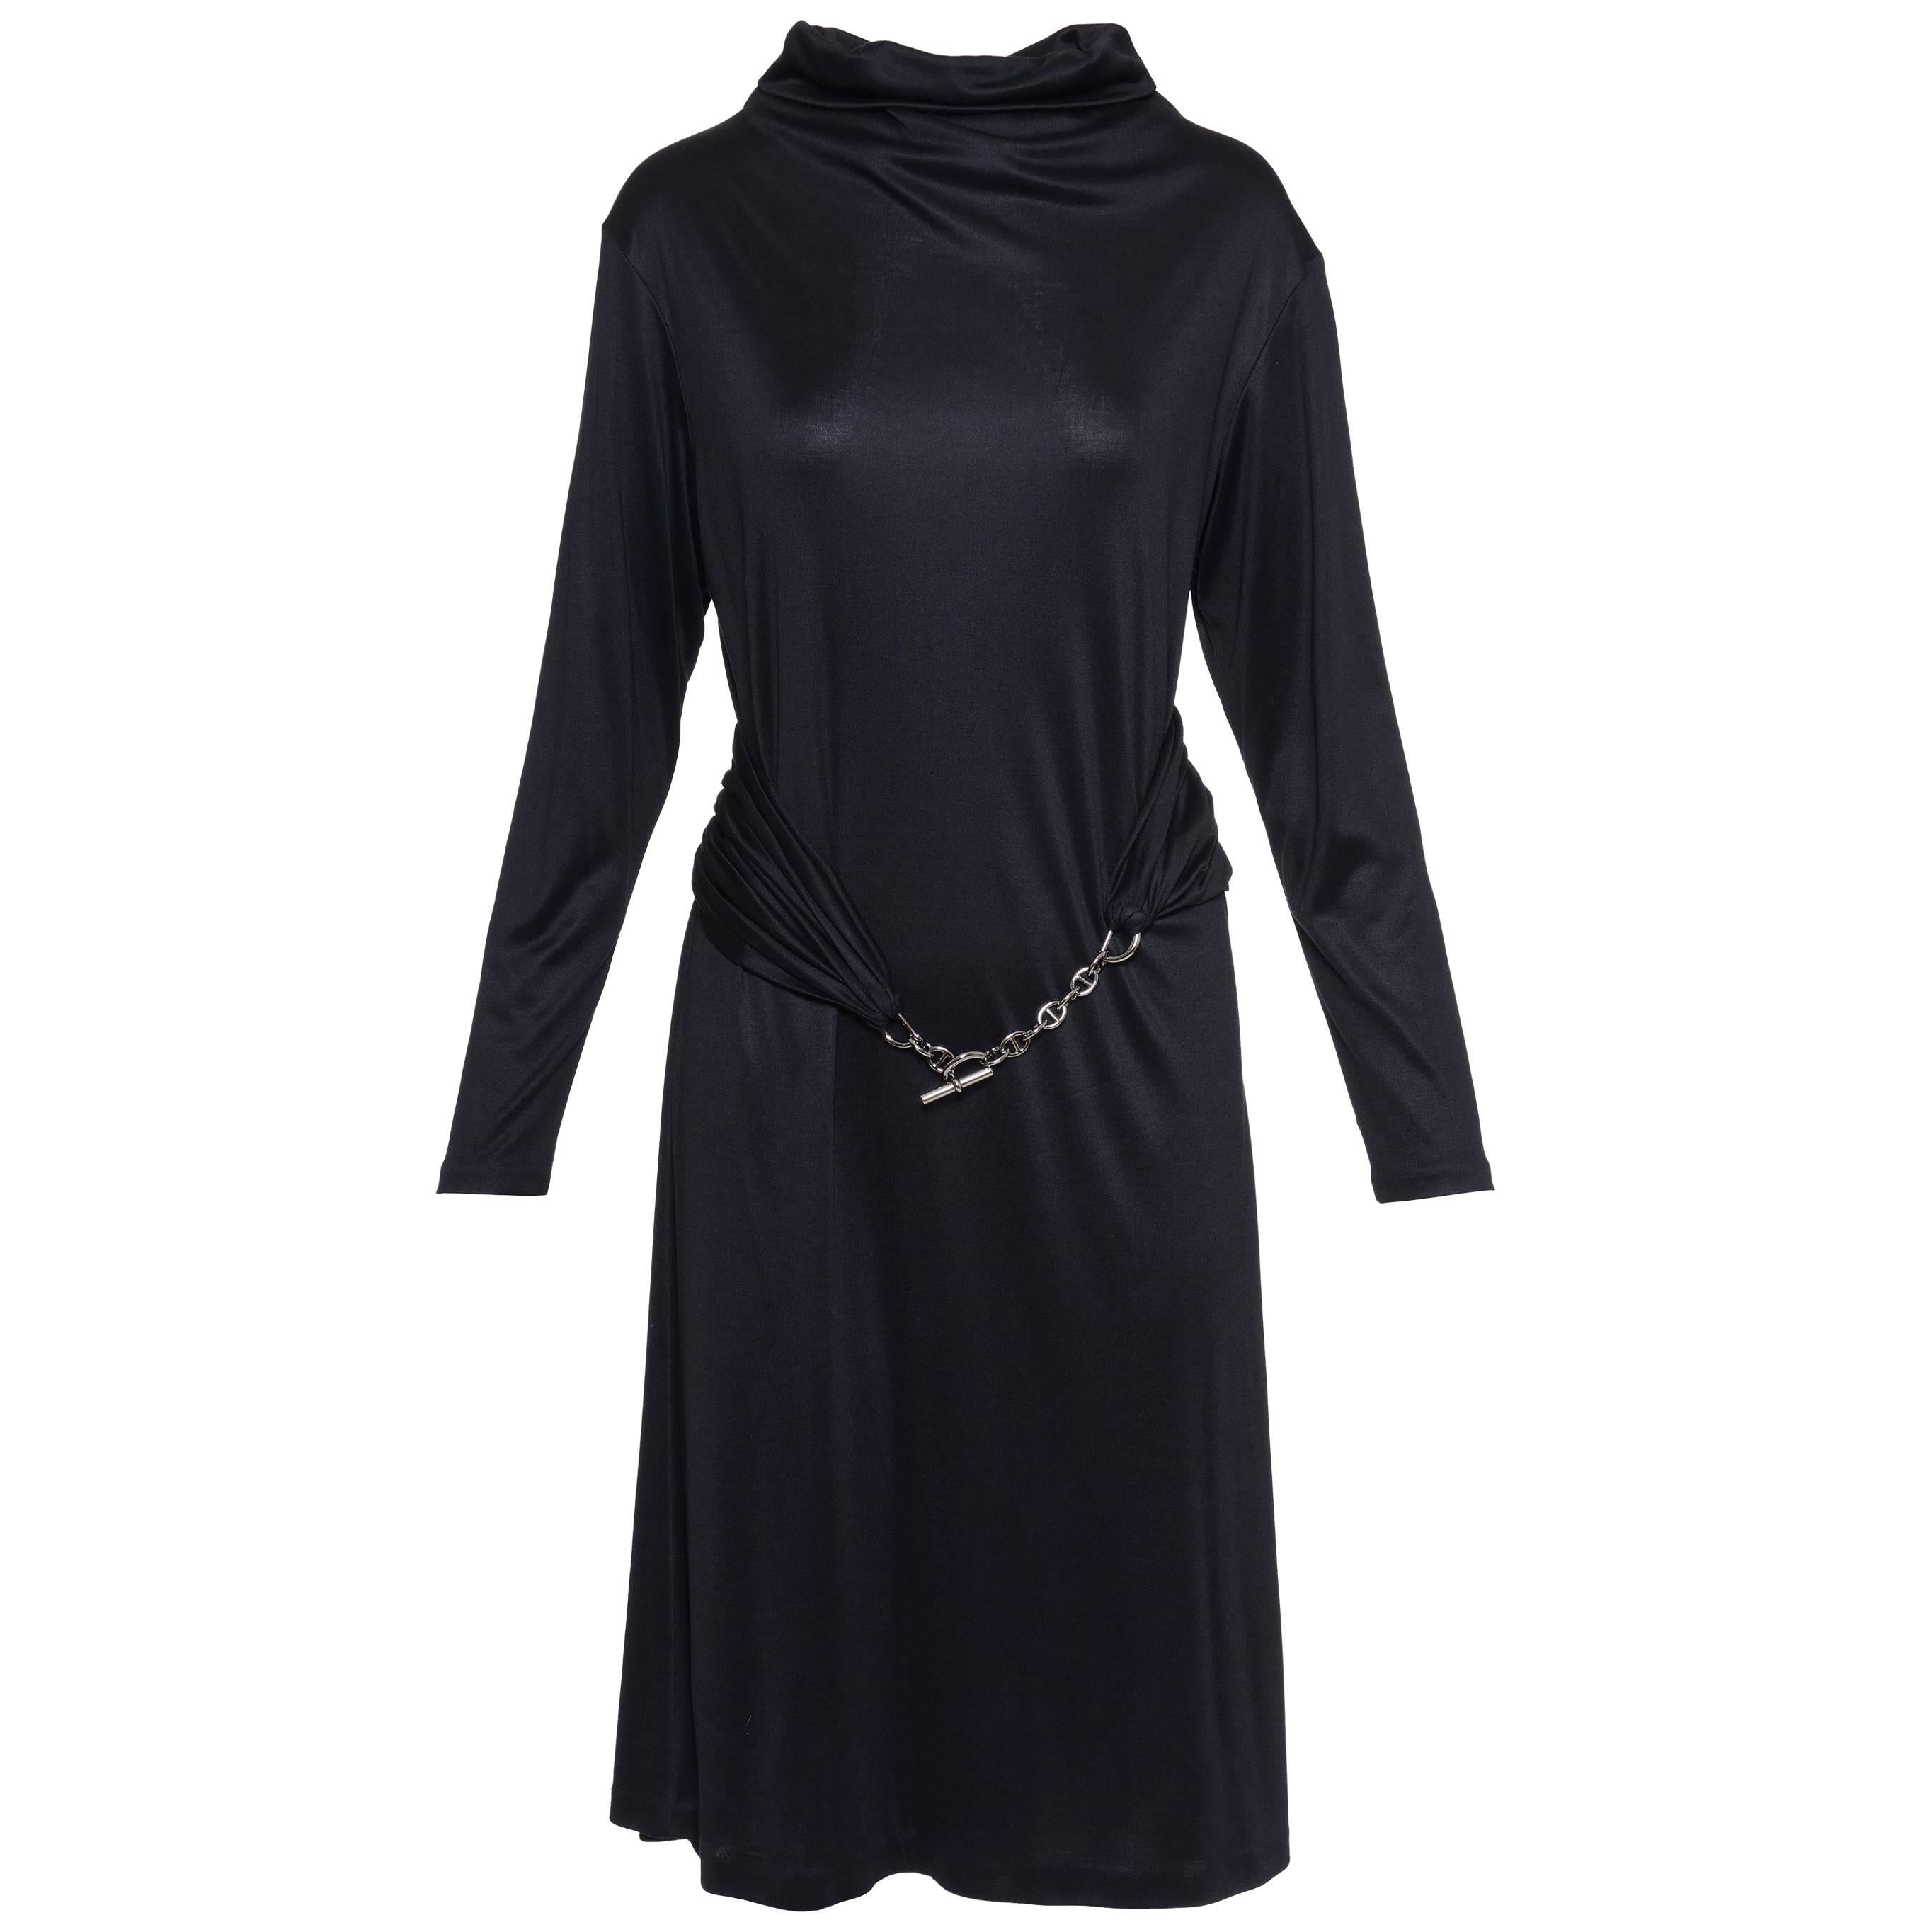 Hermes Black Jersey Dress With Chain Belt For Sale